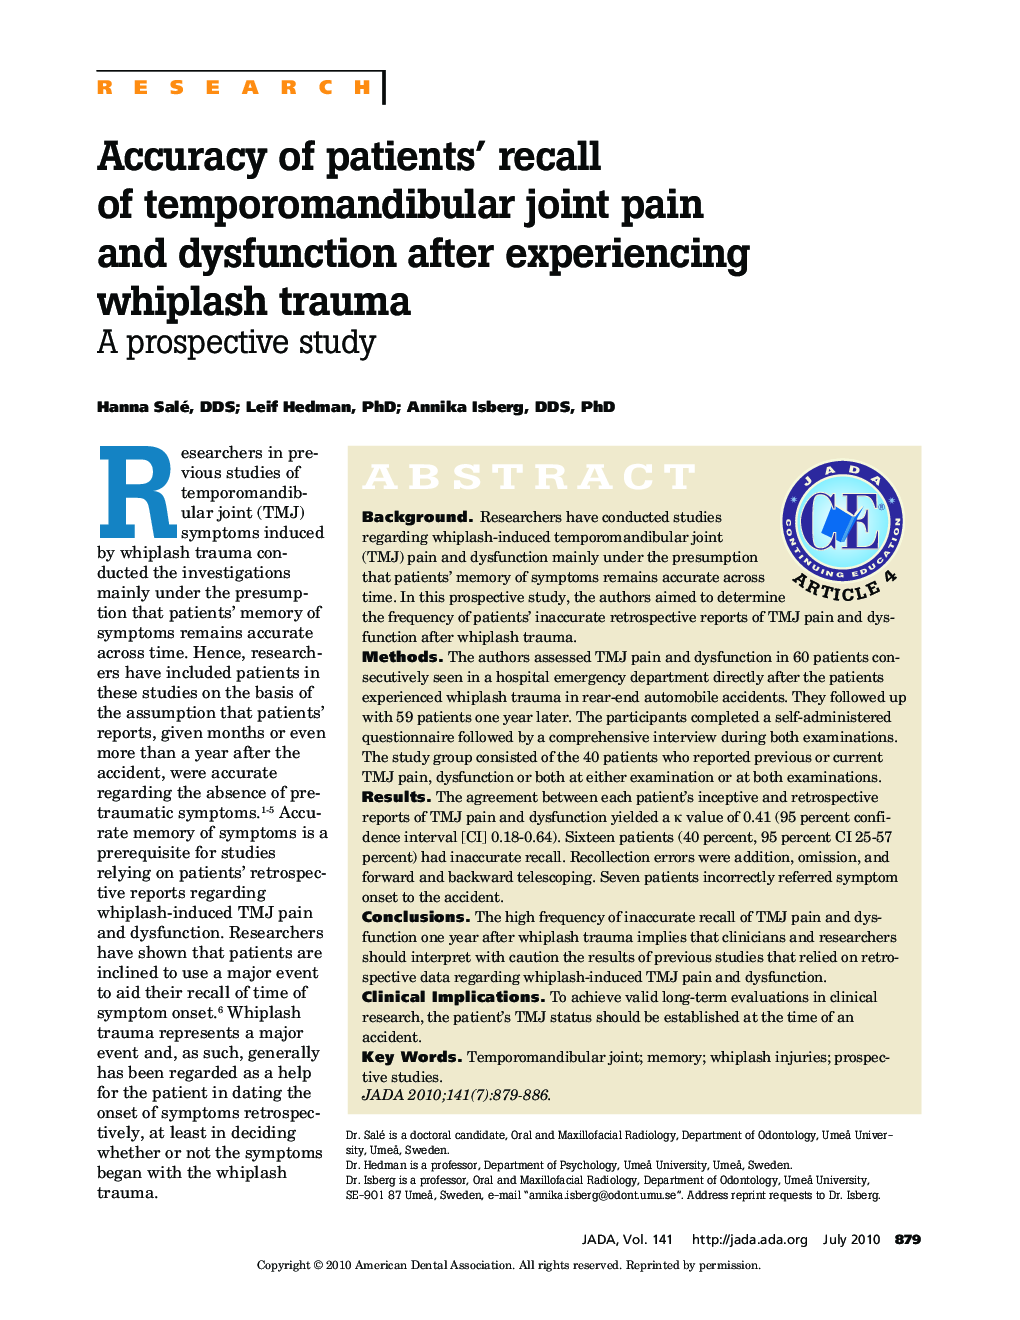 Accuracy of patients' recall of temporomandibular joint pain and dysfunction after experiencing whiplash trauma : A Prospective Study